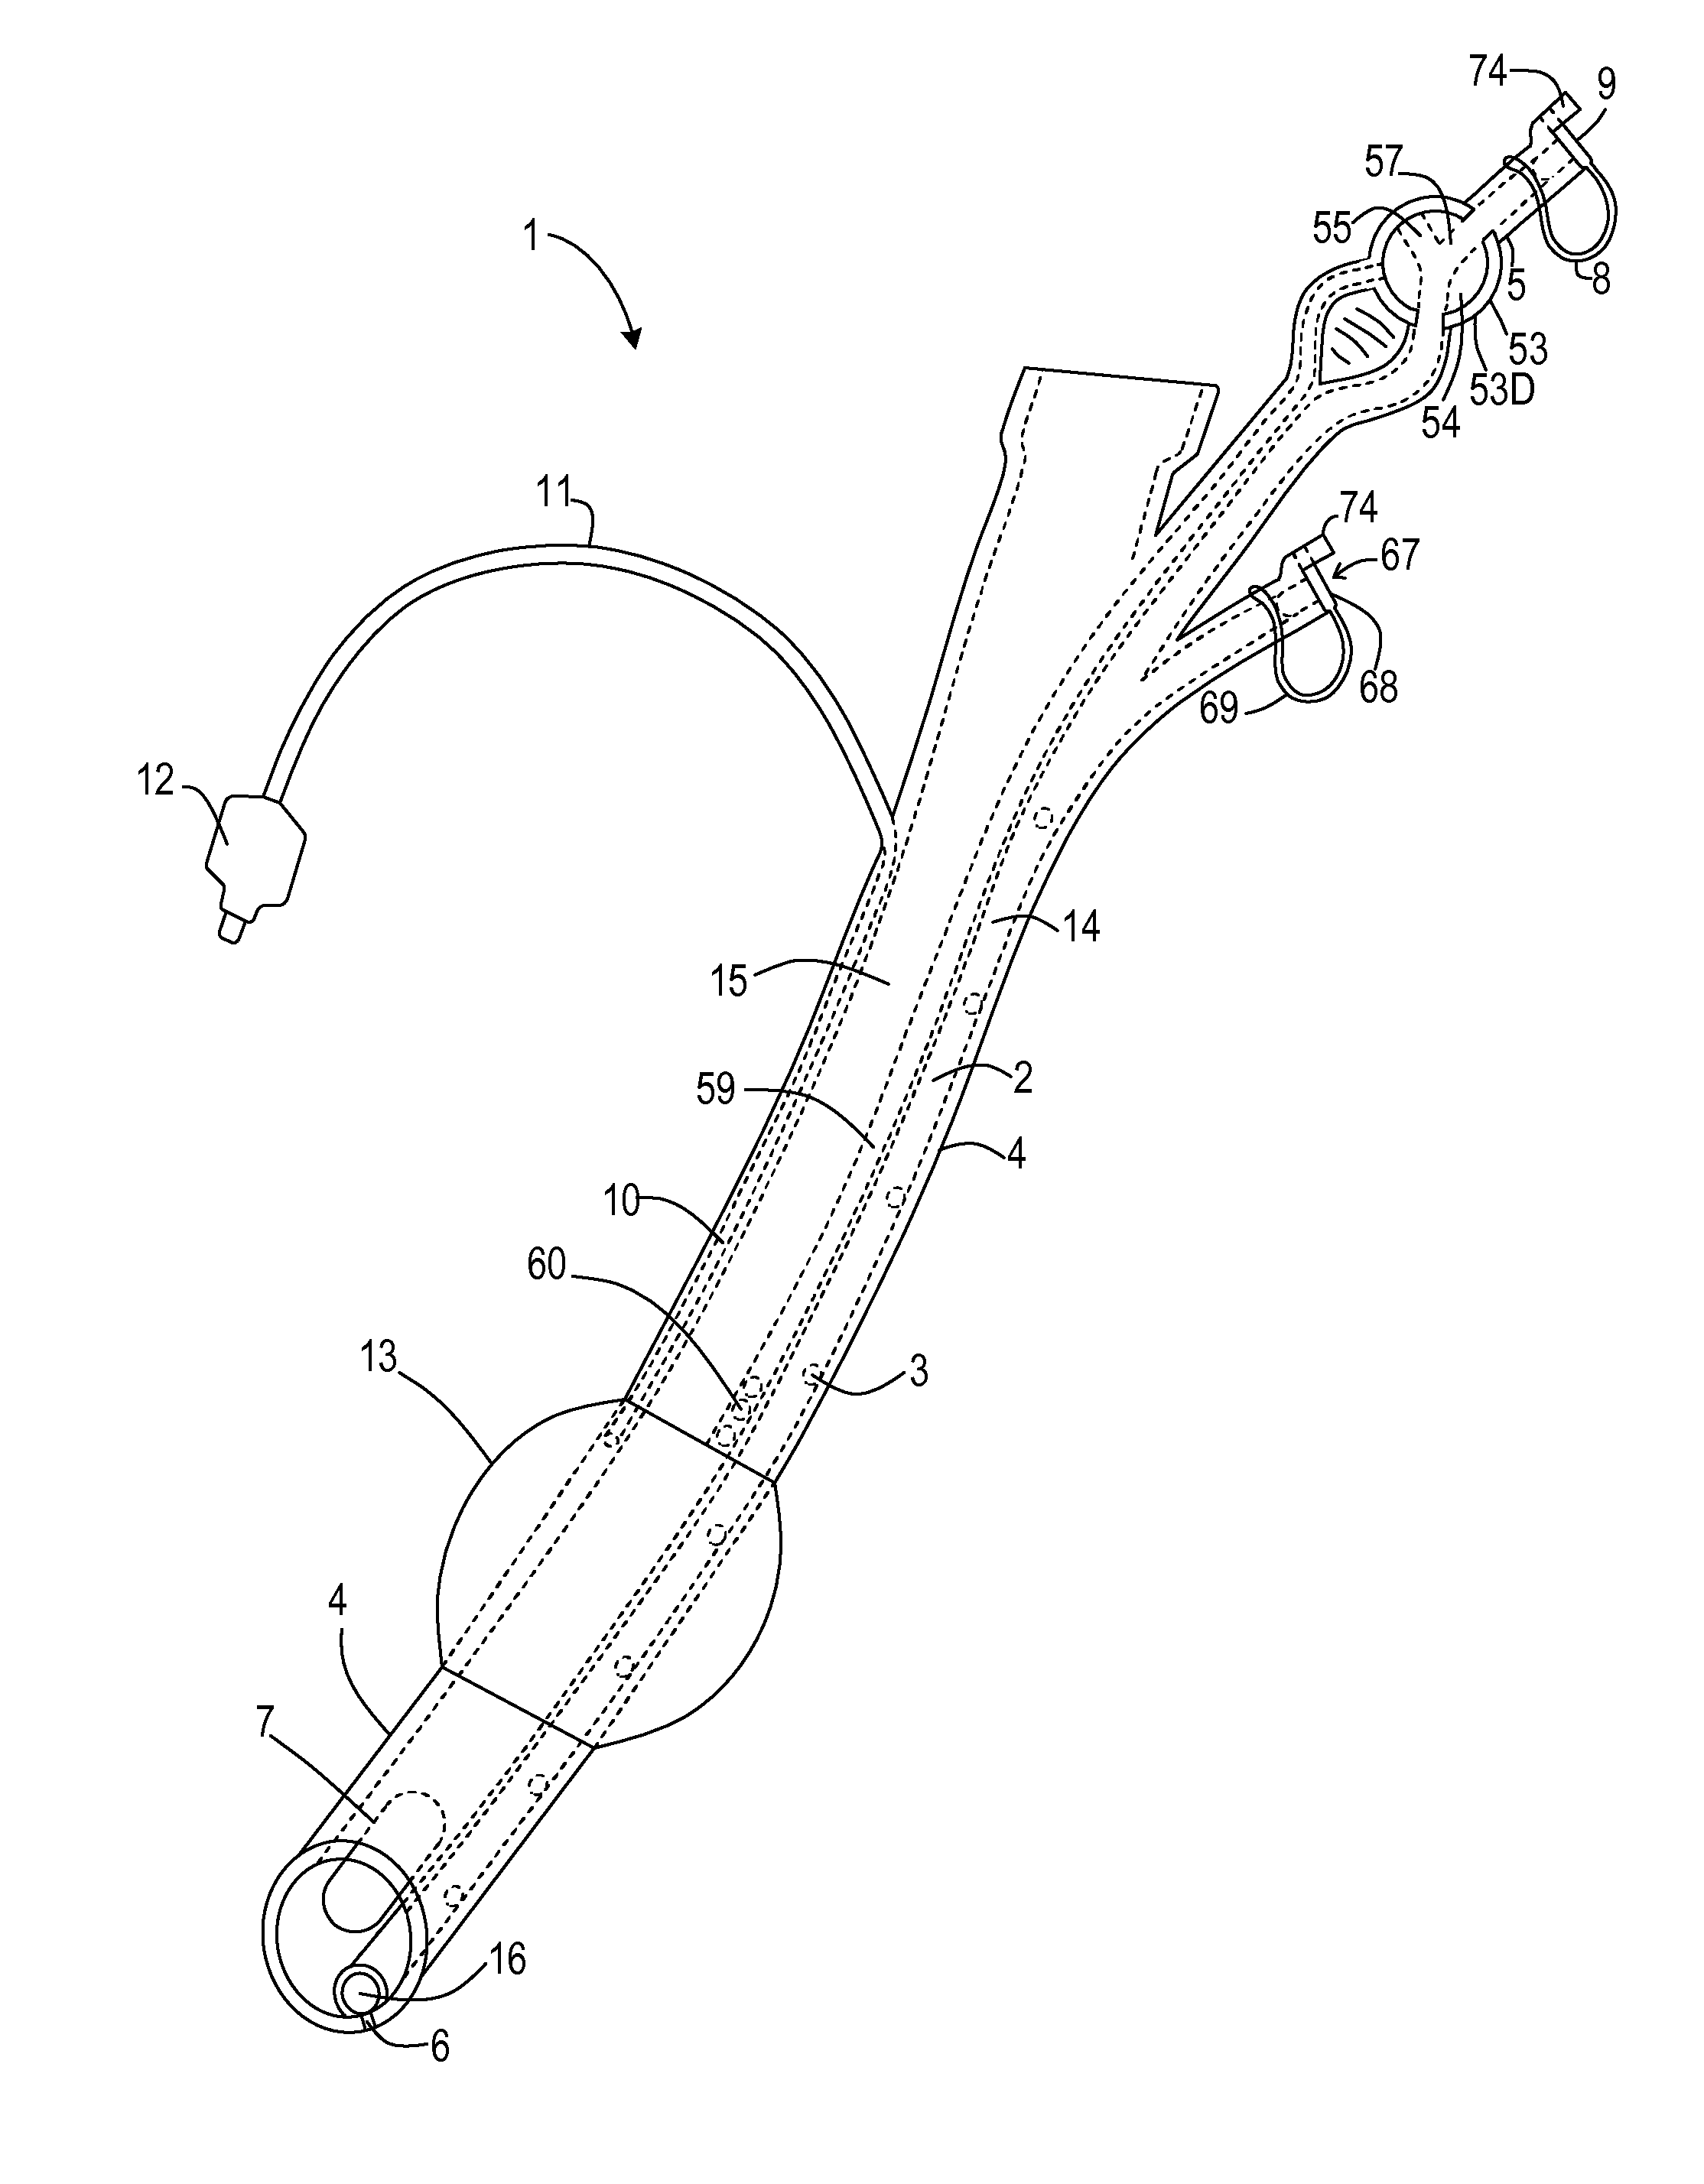 Endotracheal tube with intrinsic suction and endotracheal suction control valve